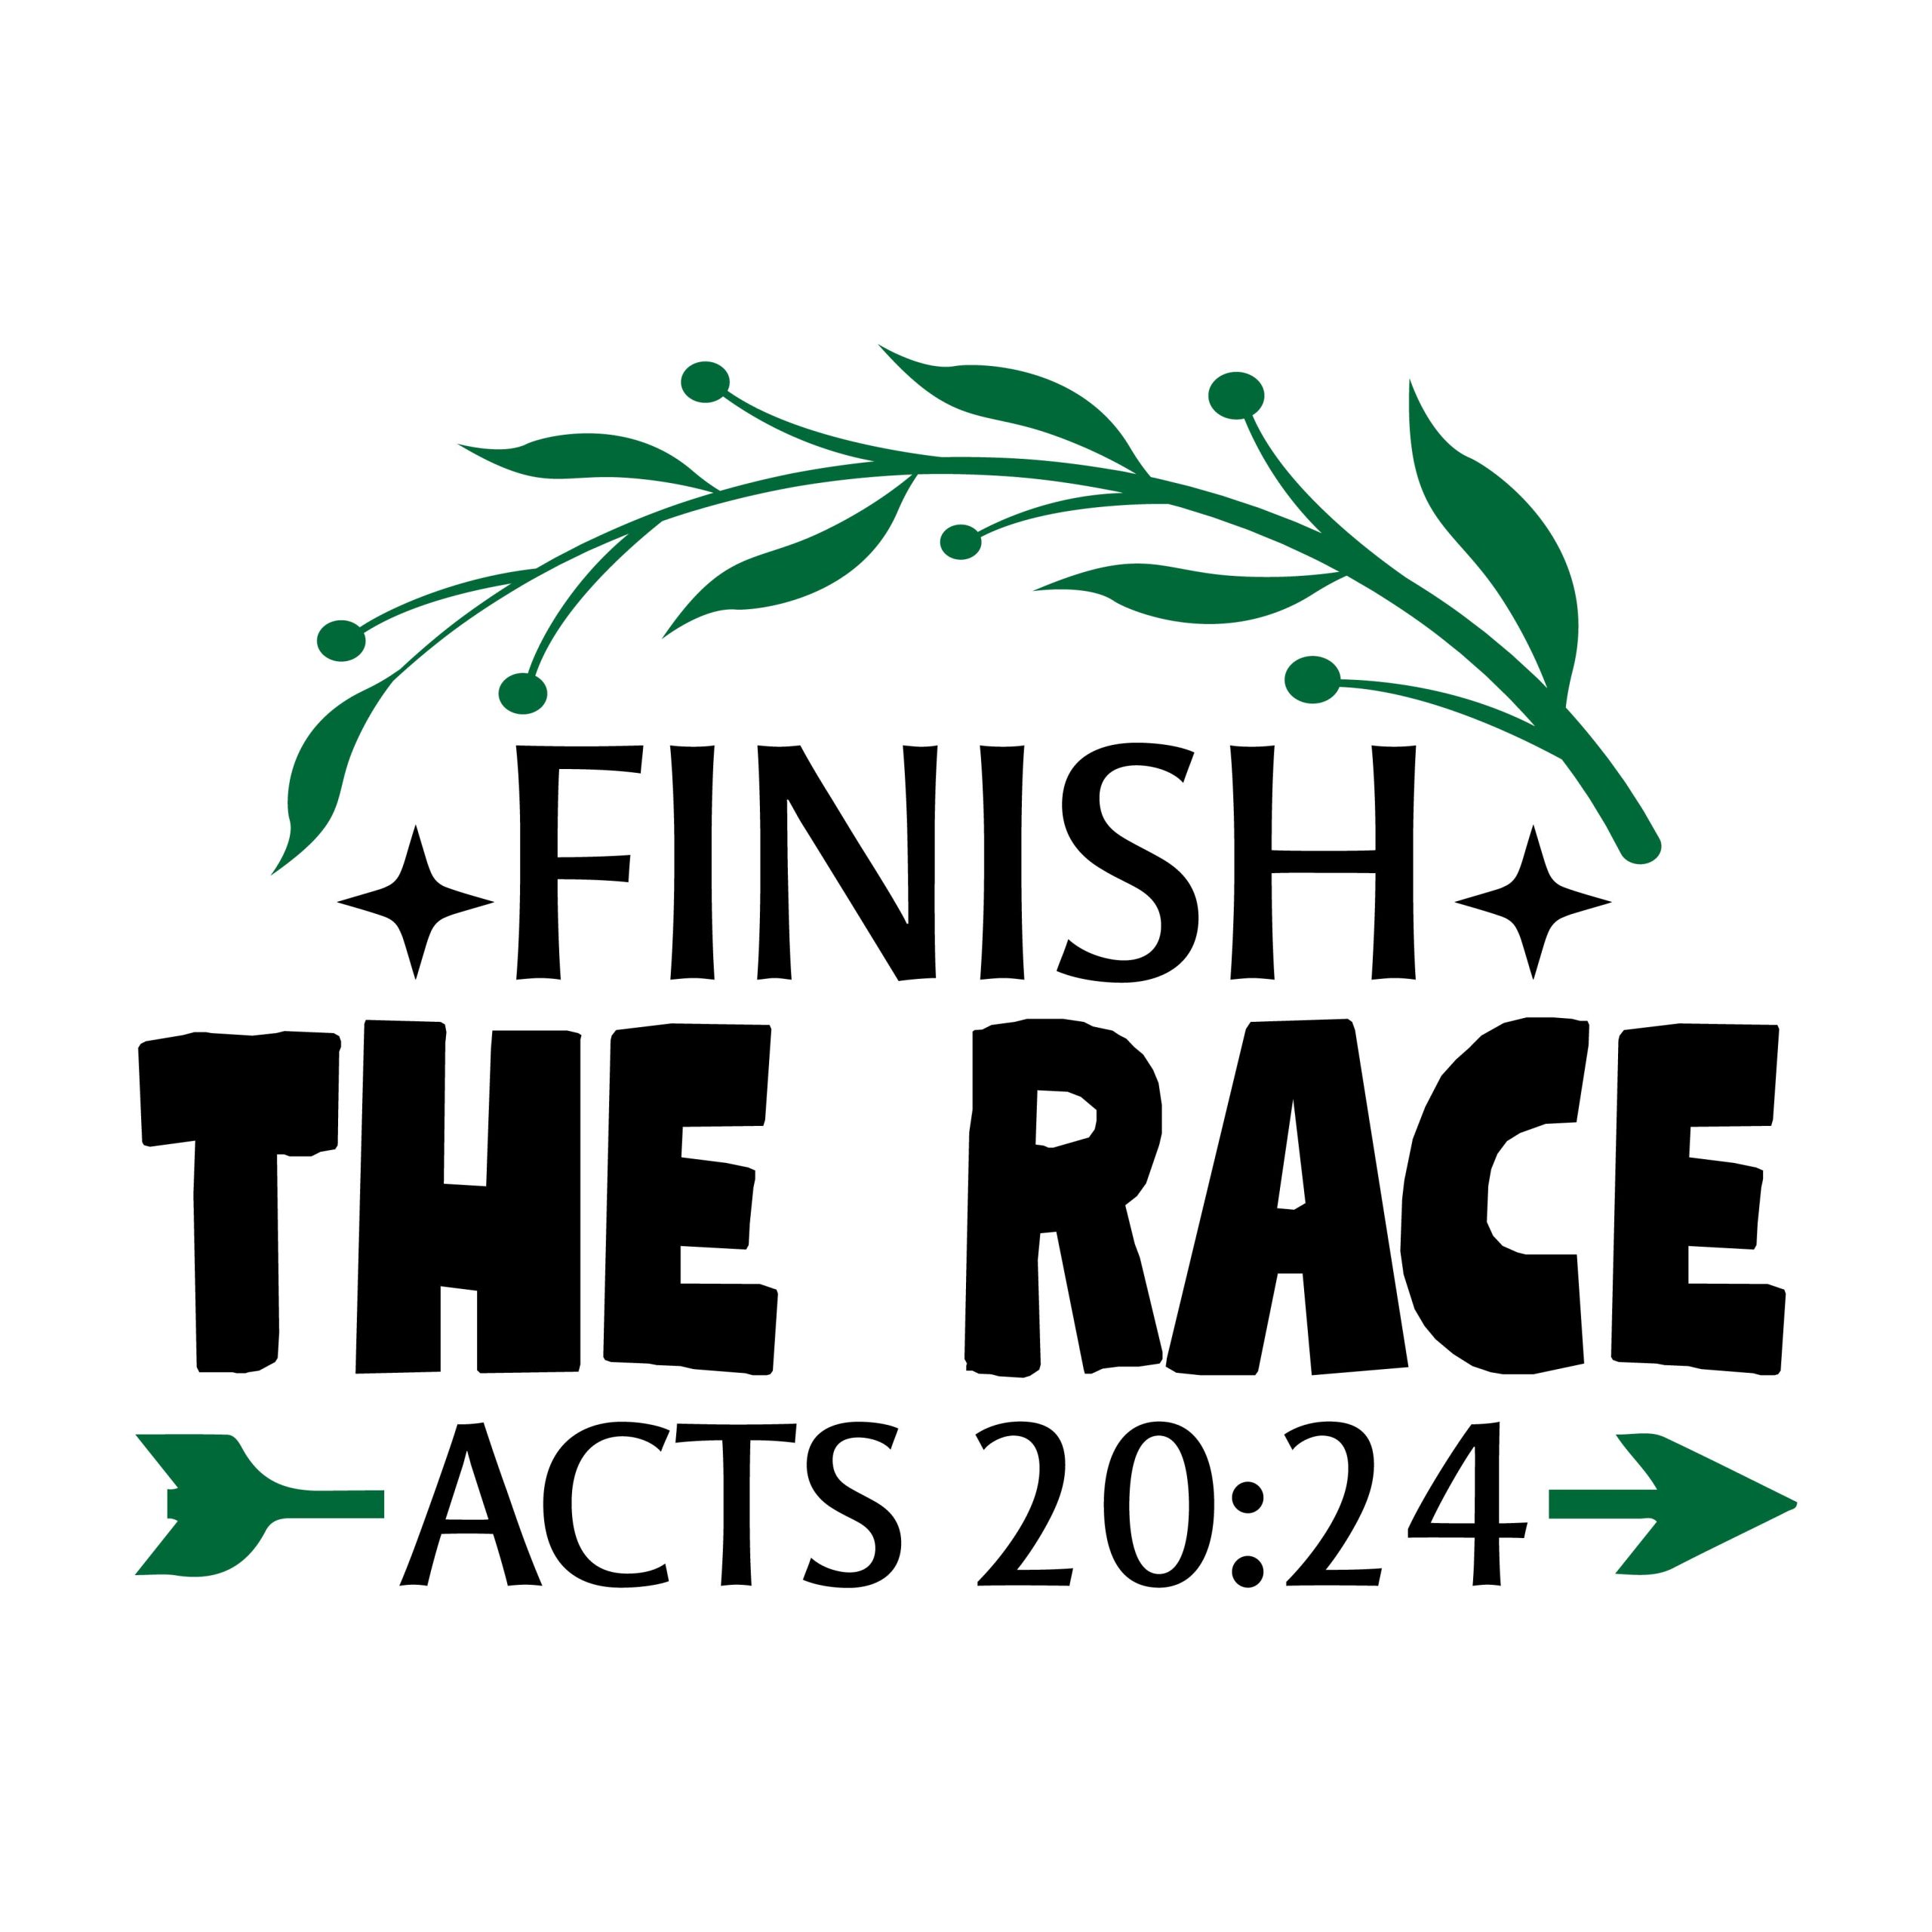 Finish the race Acts 20:24, bible verses, scripture verses, svg files, passages, sayings, cricut designs, silhouette, embroidery, bundle, free cut files, design space, vector